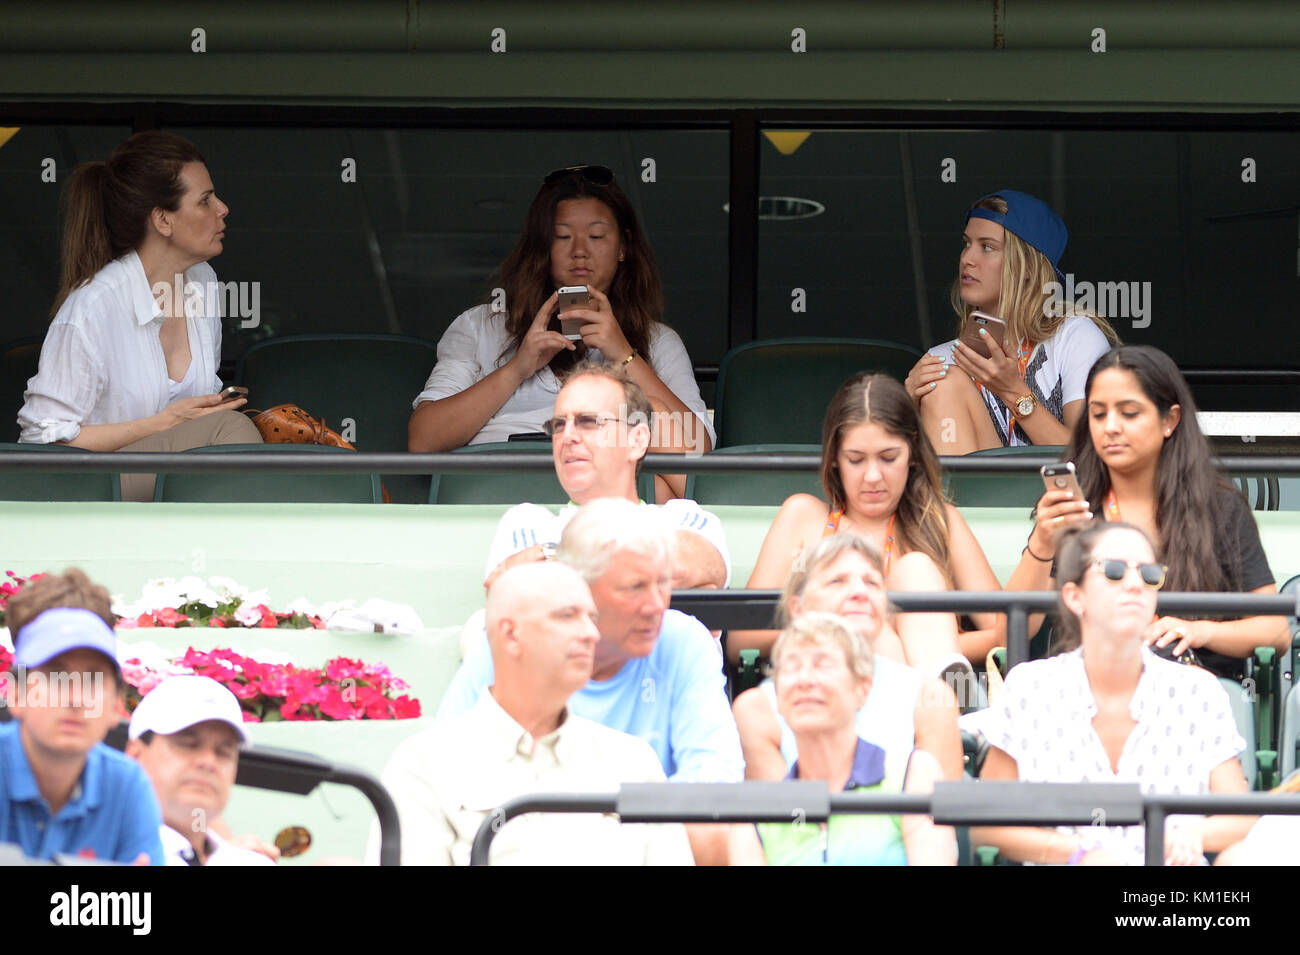 KEY BISCAYNE, FL - MARCH 28: Tennis player Eugenie Bouchard looks Smitten with someone on her cell phone while she watches Grigor Dimitrov of Bulgaria defeat Andy Murray of Great Britain day 8 of the Miami Open presented by Itau at Crandon Park Tennis Center on March 28, 2016 in Key Biscayne, Florida.   People:  Eugenie Bouchard Stock Photo